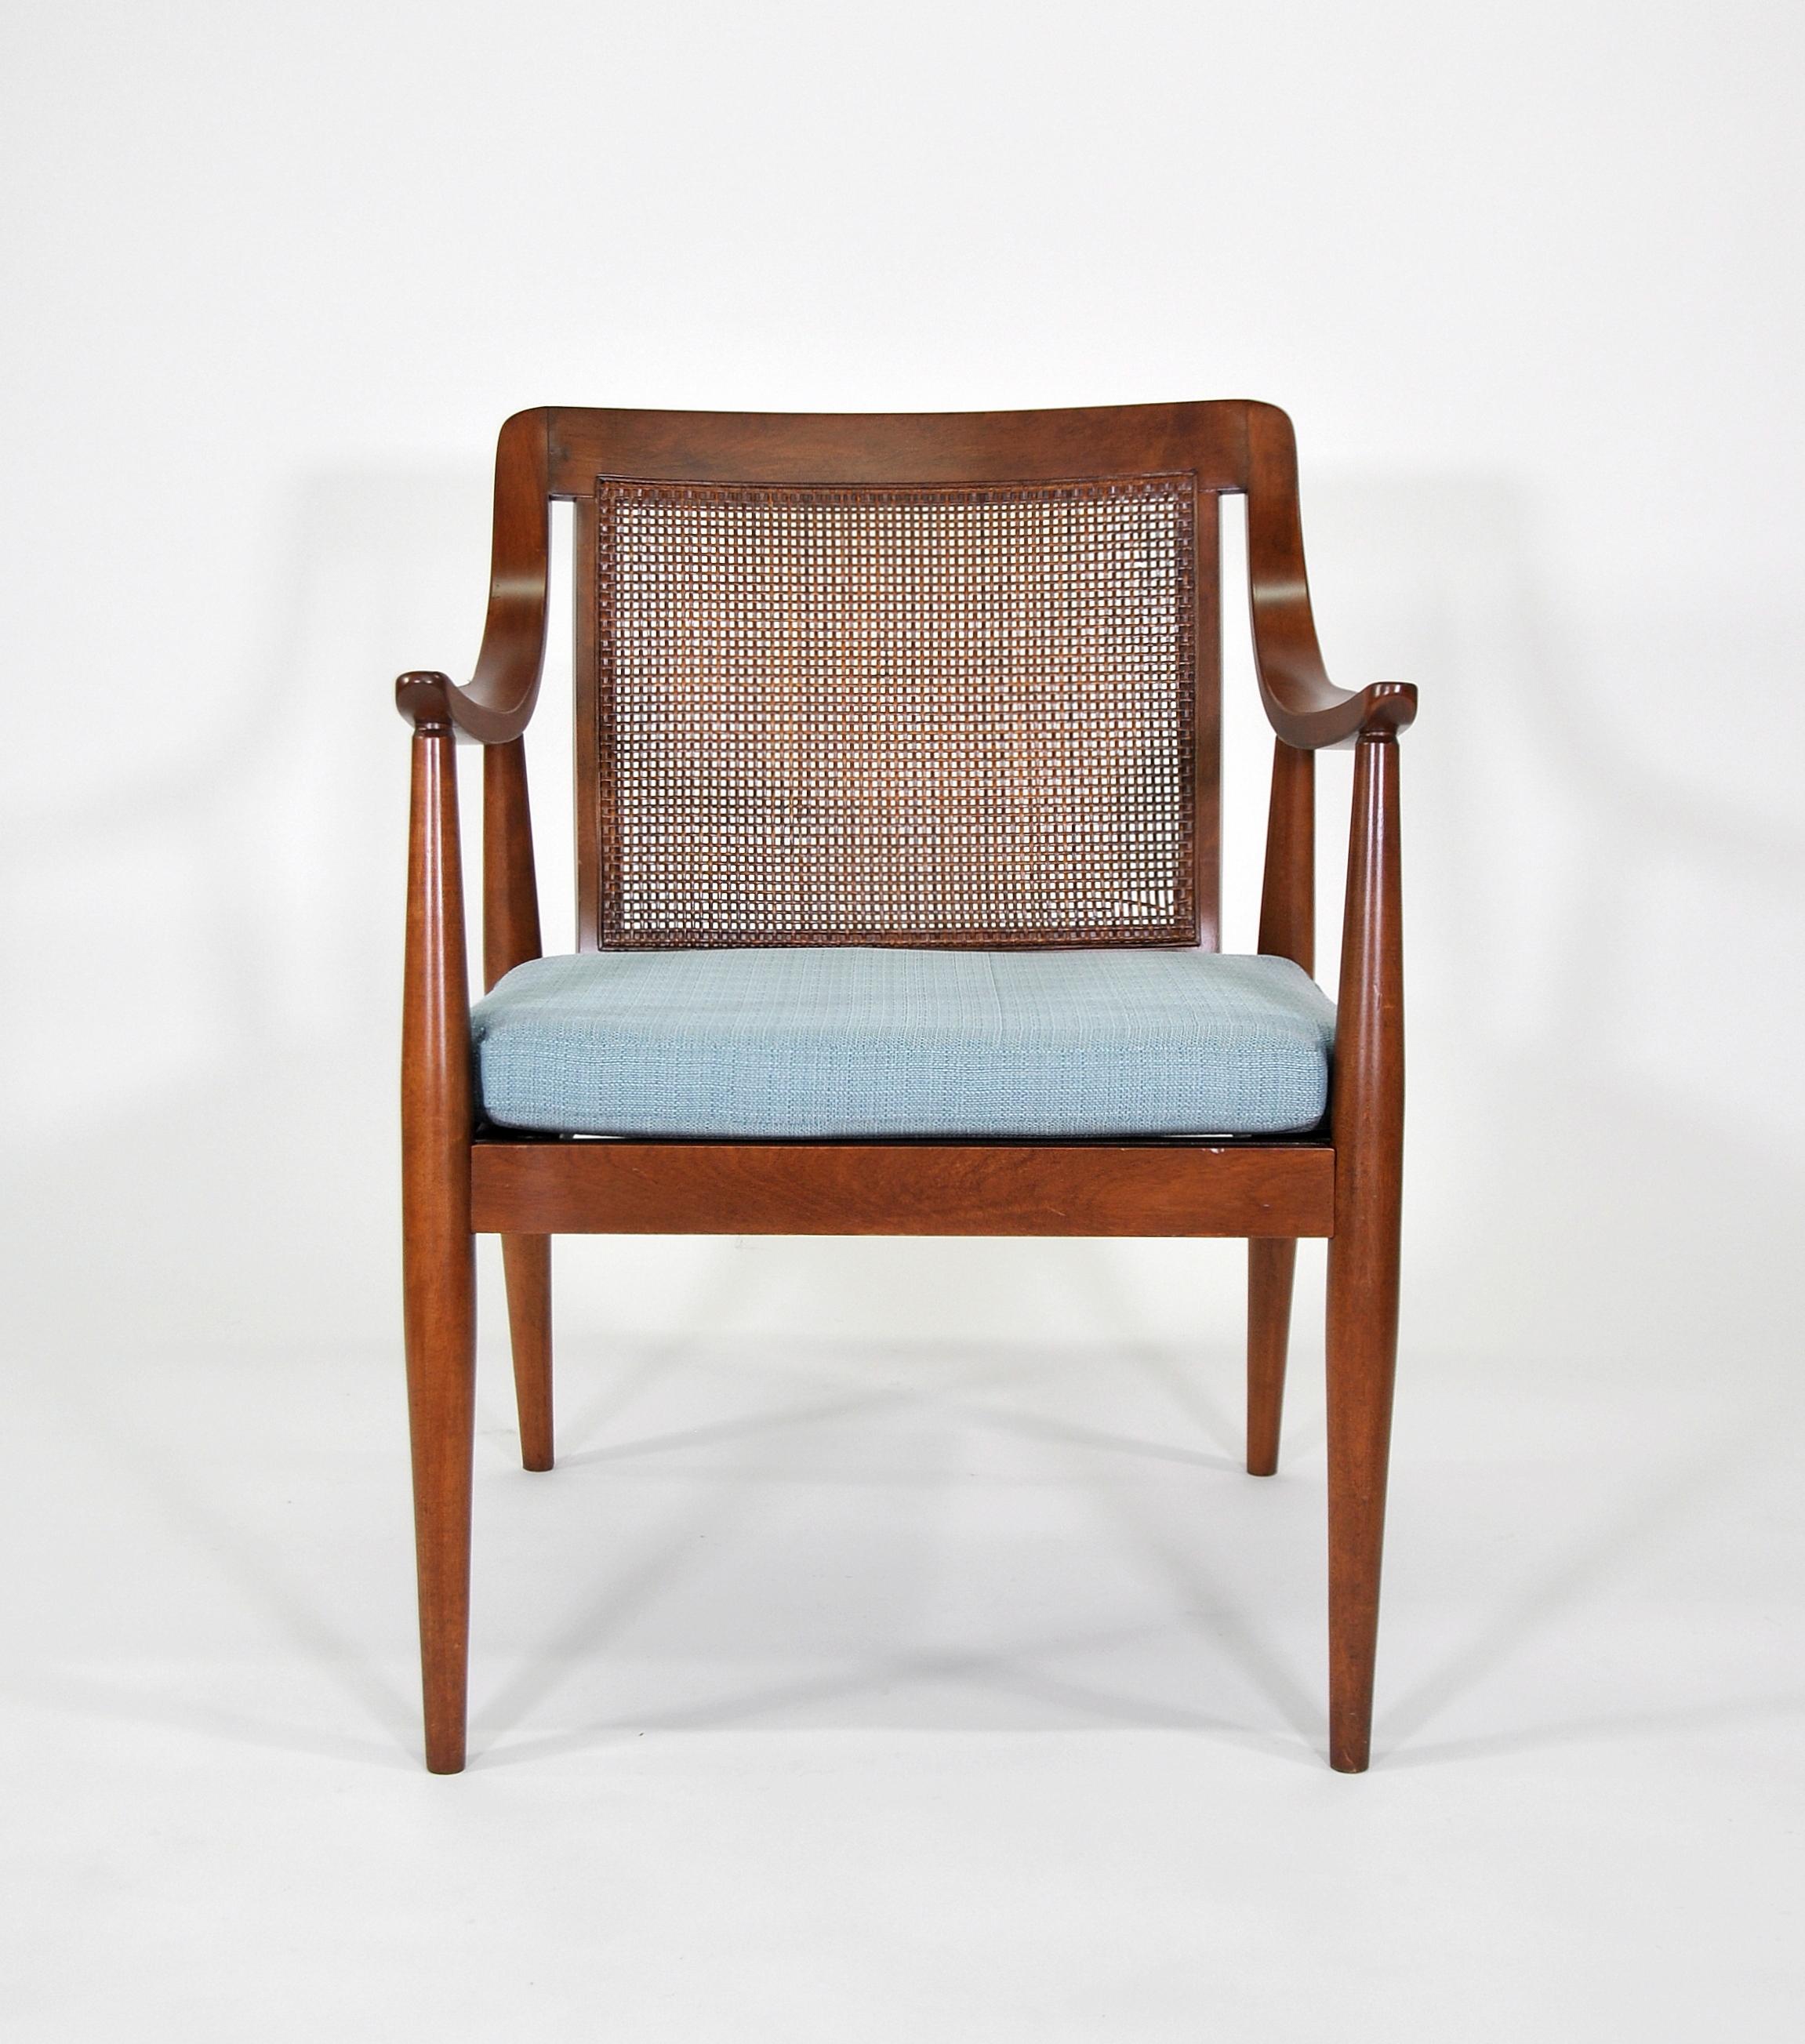 A lovely vintage Mid-Century Modern armchair with caned back in the manner of Peter Hvidt and Olga Molgaard-Nielsen, dating from the 1960s. The loose cushion is brand new and has a light azure sky blue or turquoise linen blend fabric. A great accent